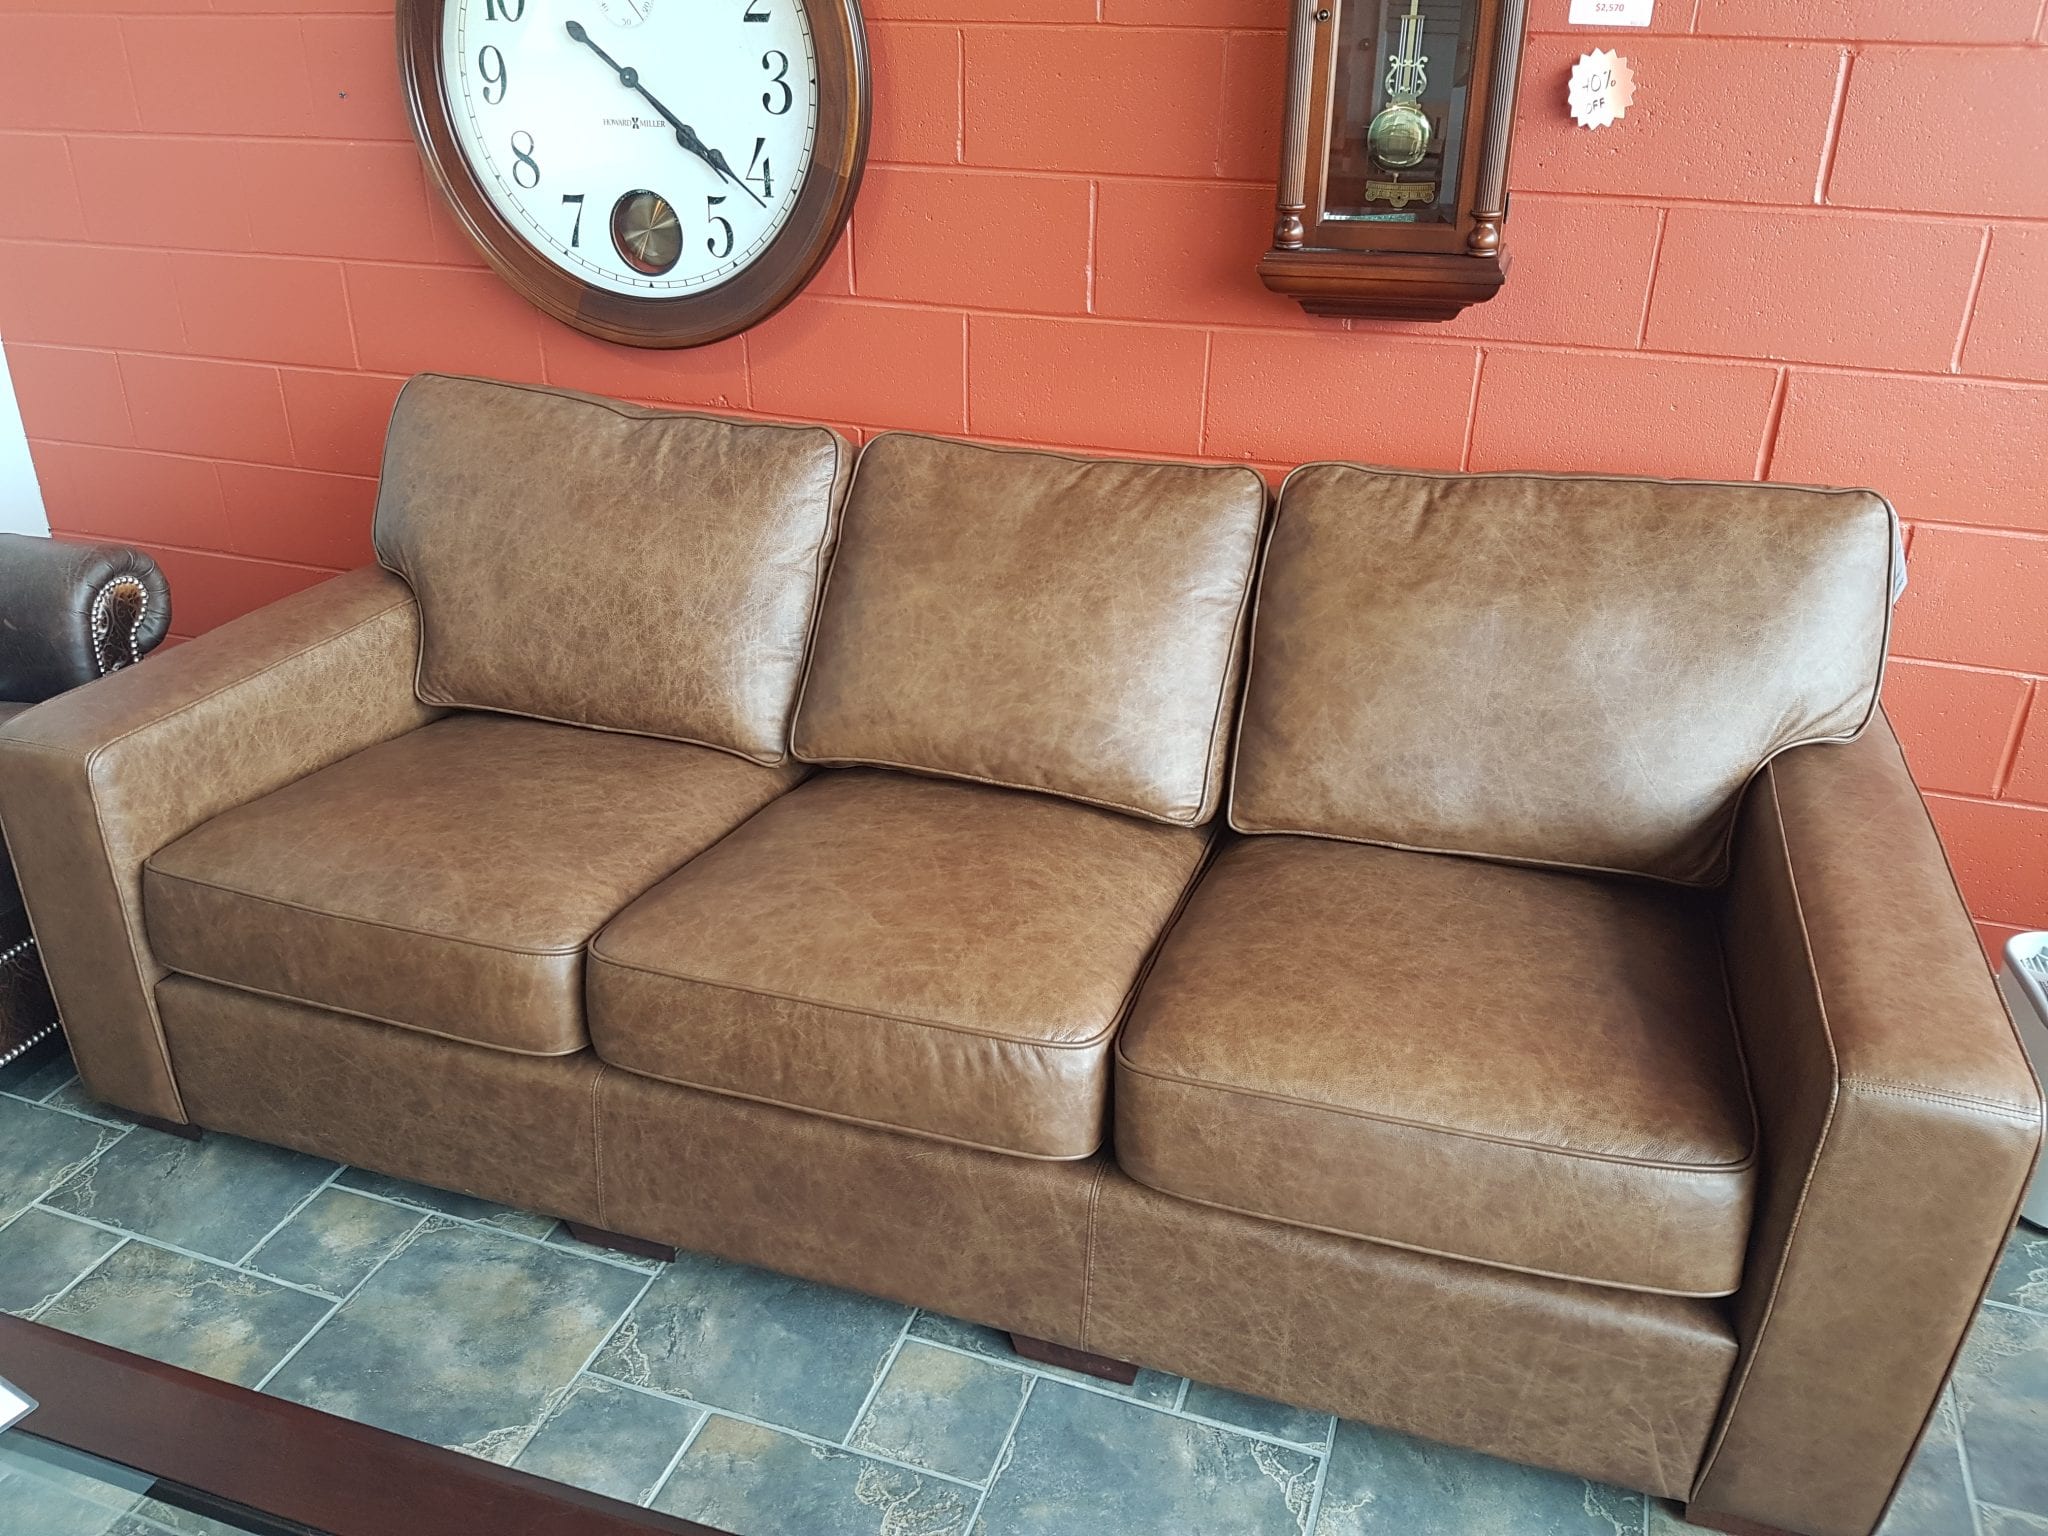 Clearance Beaumont Leather Sofa, Clearance Leather Furniture